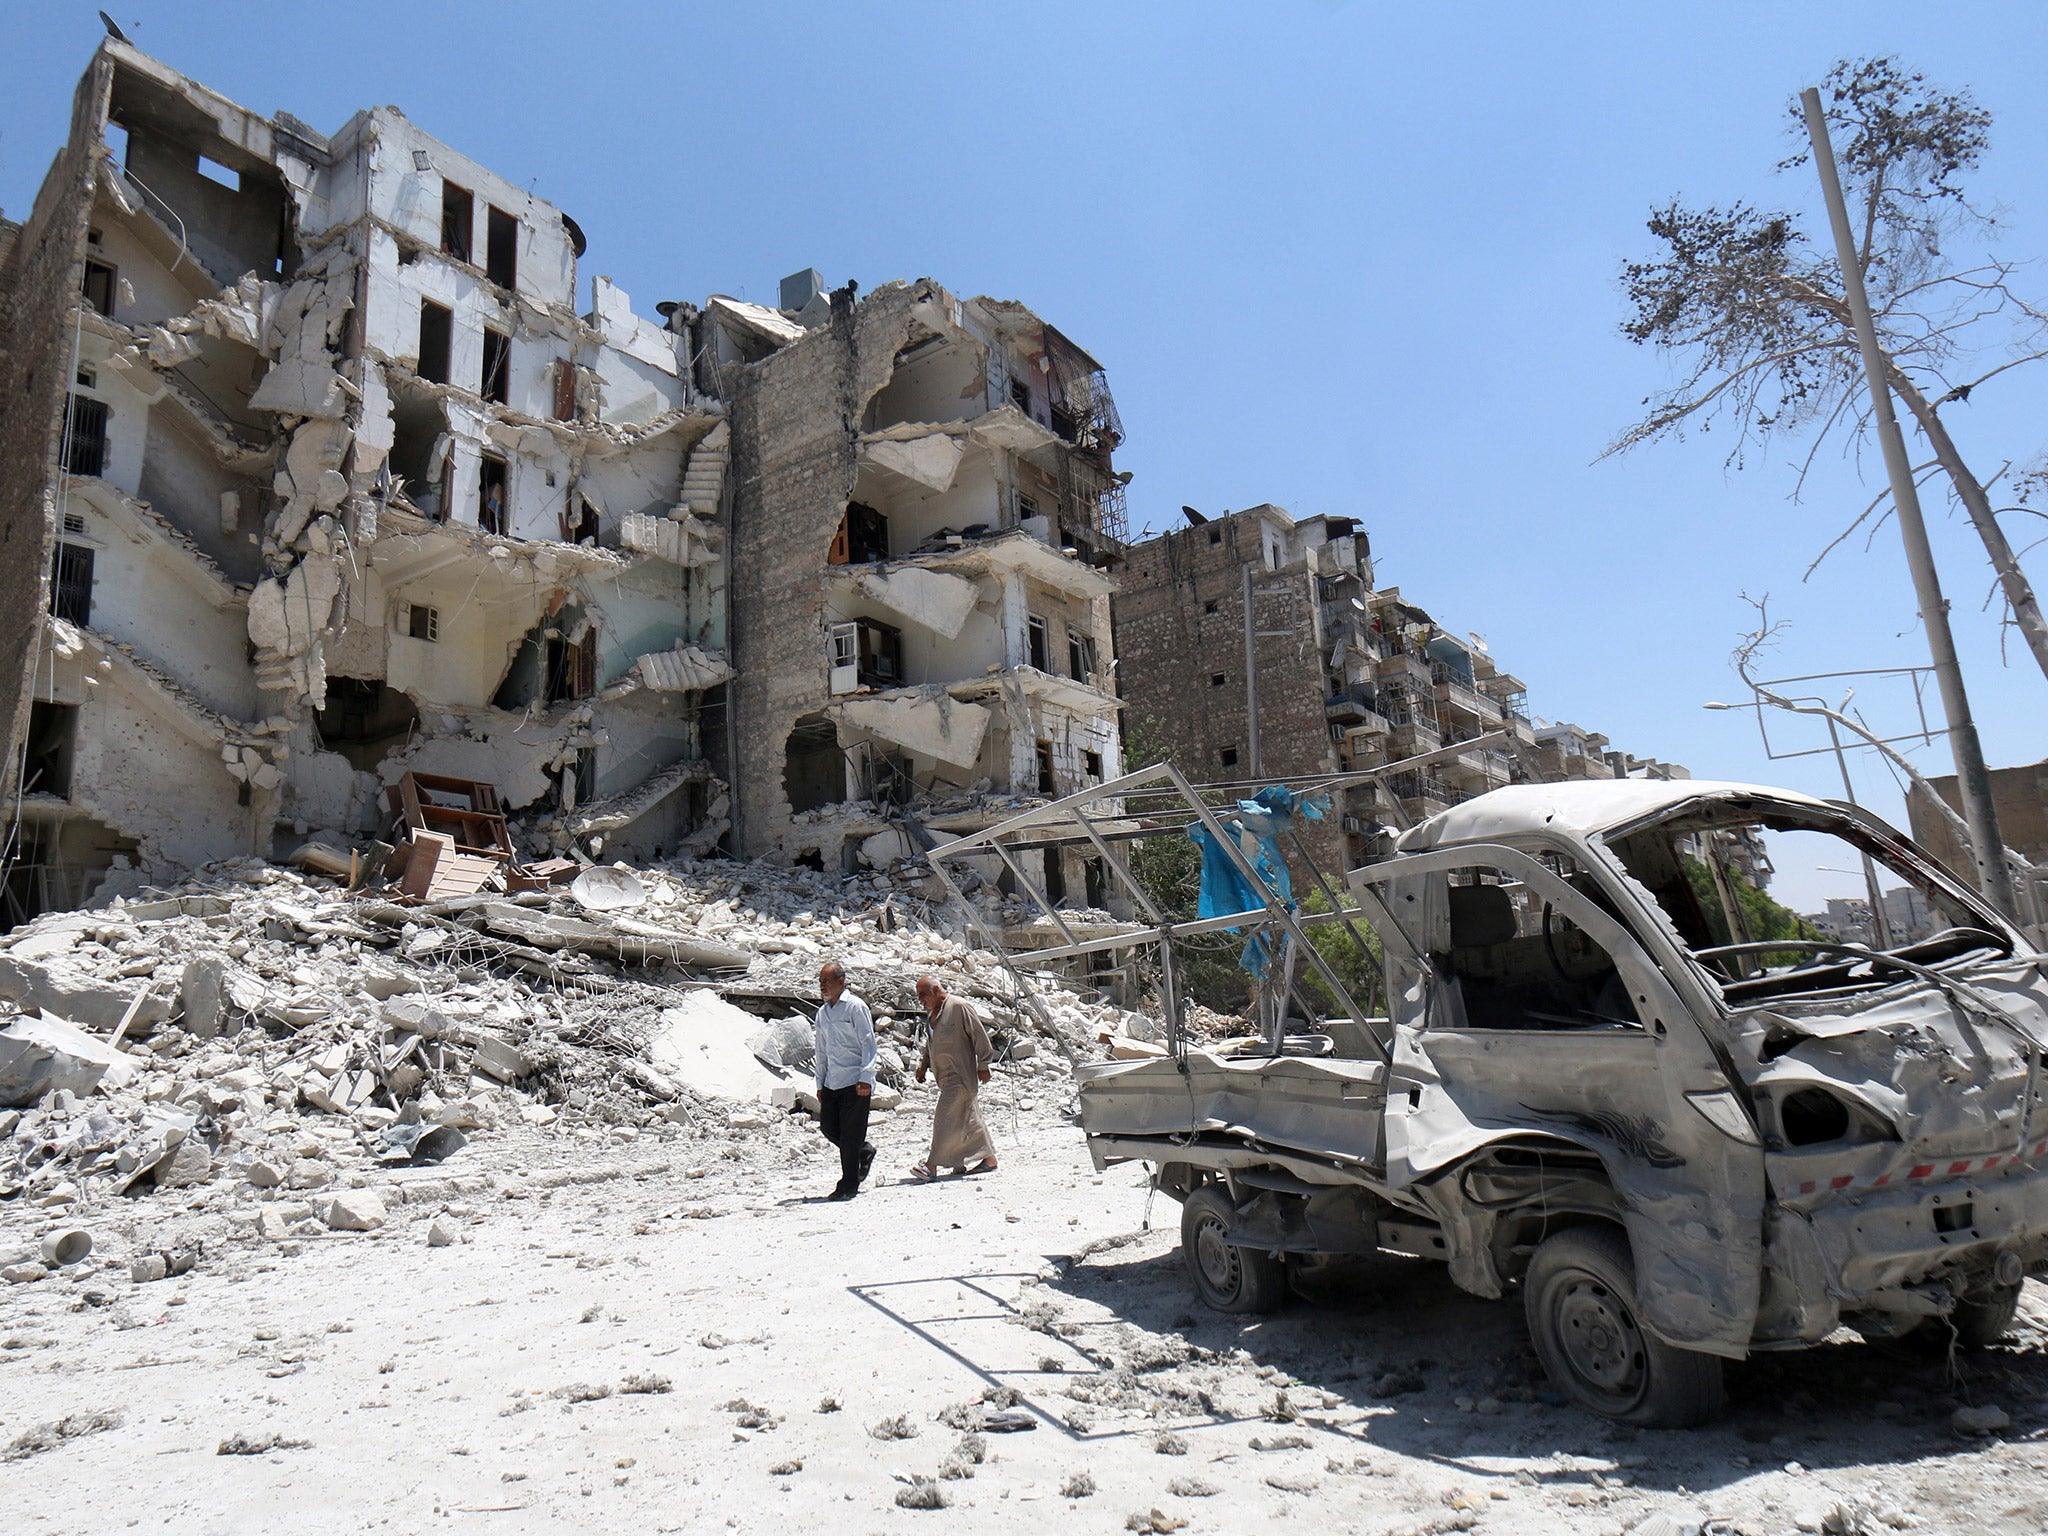 Syrian men walk amidst the rubble and debris in the Qadi Askar district of the northern city of Aleppo (Getty)